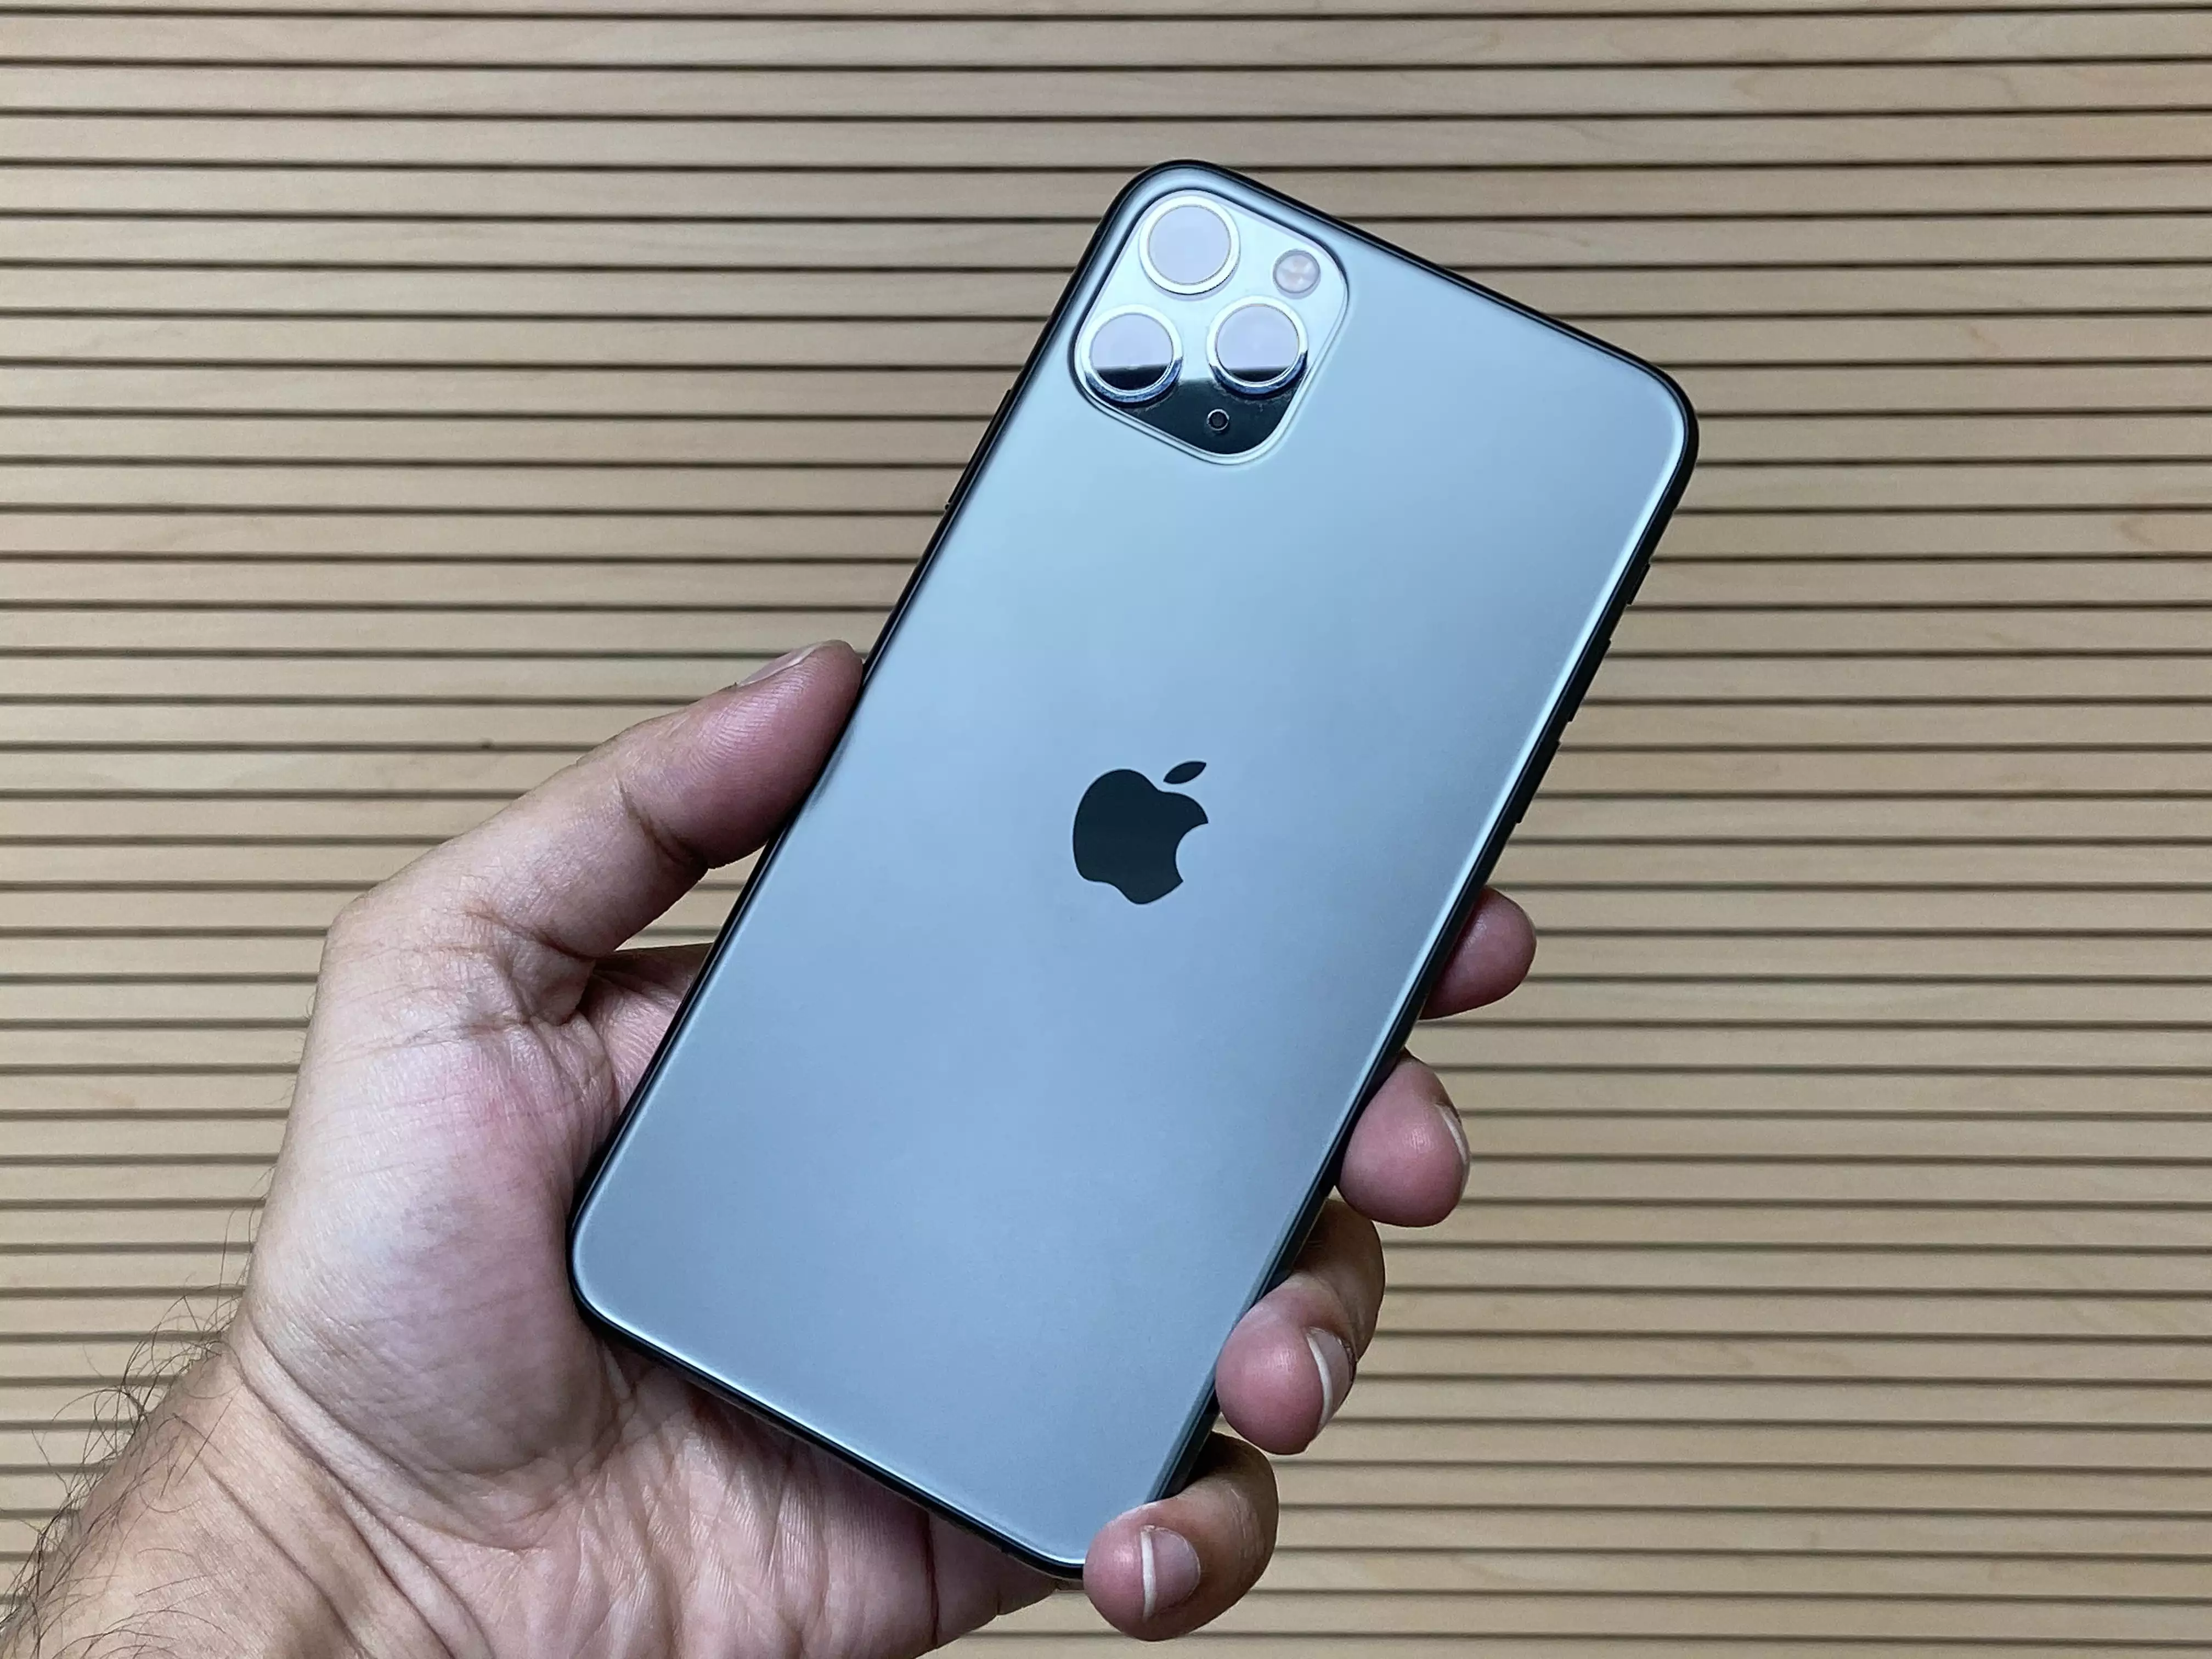 DxOMark somehow thinks the iPhone 11 Pro Max takes worse selfies